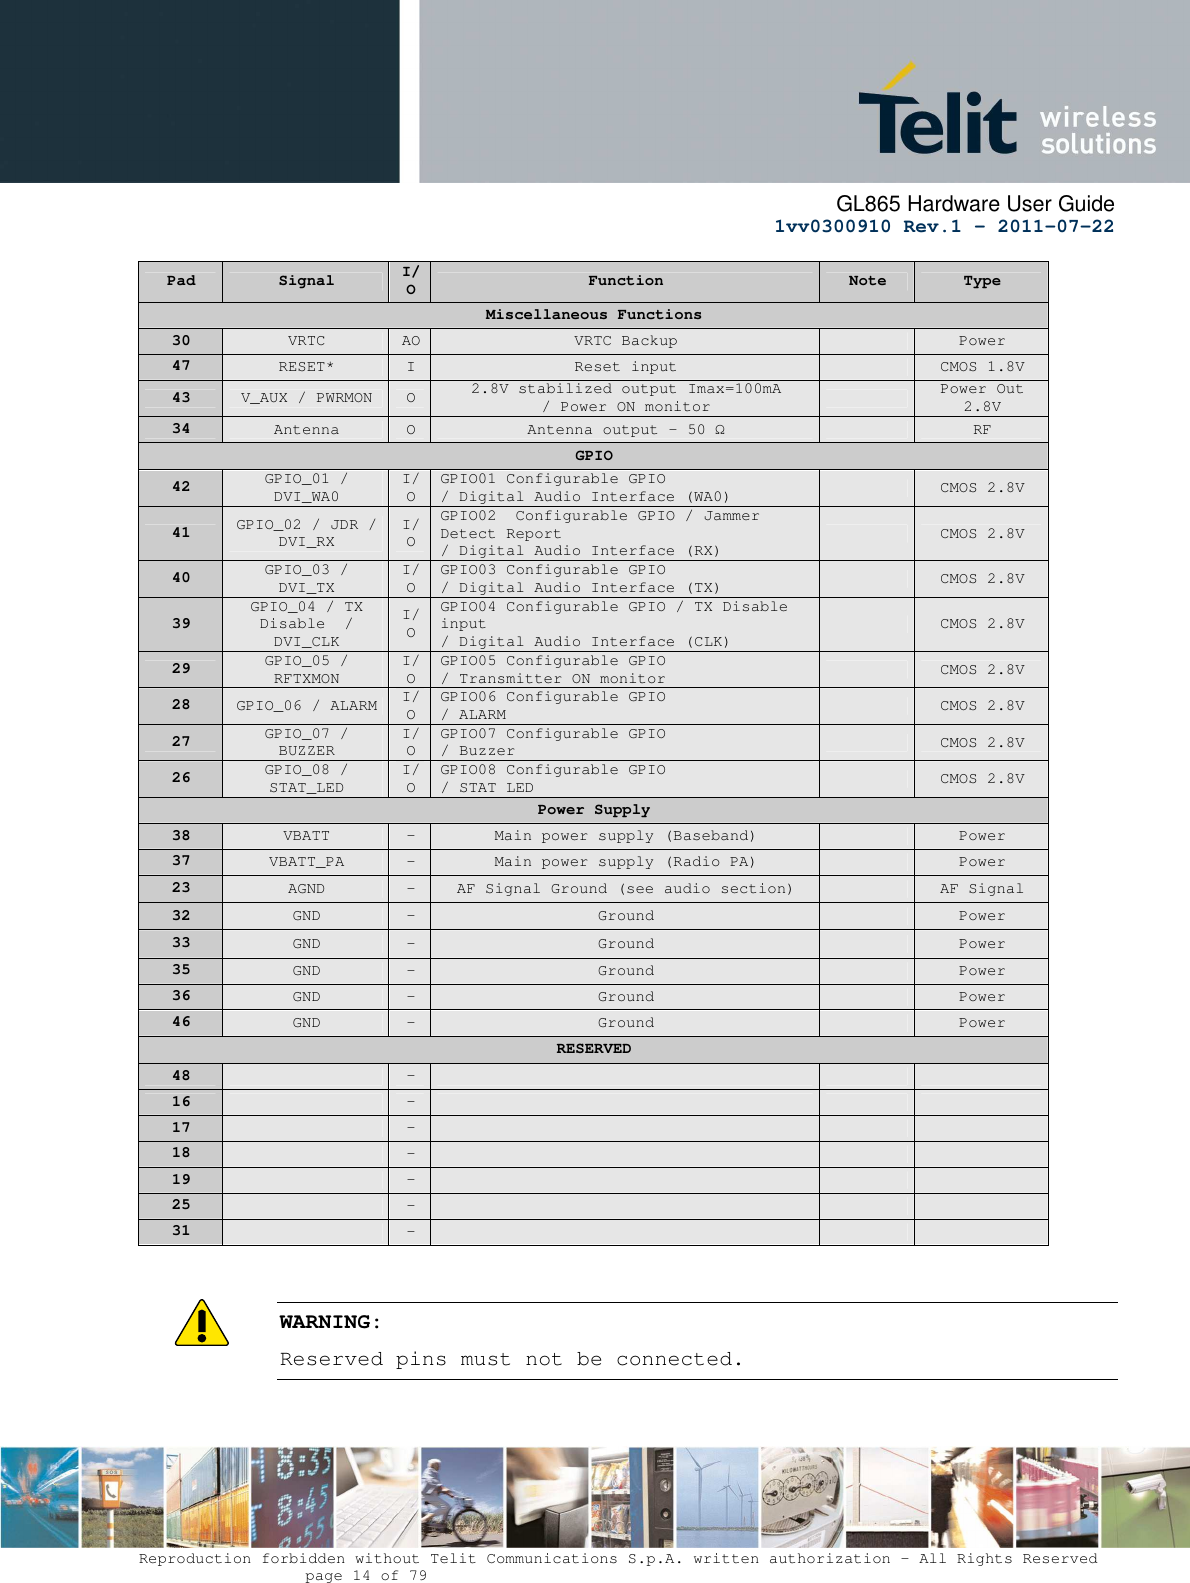      GL865 Hardware User Guide     1vv0300910 Rev.1 – 2011-07-22       Reproduction forbidden without Telit Communications S.p.A. written authorization - All Rights Reserved    page 14 of 79  Pad  Signal  I/O  Function  Note  Type Miscellaneous Functions 30  VRTC  AO VRTC Backup     Power 47  RESET*  I  Reset input    CMOS 1.8V 43  V_AUX / PWRMON  O  2.8V stabilized output Imax=100mA / Power ON monitor    Power Out 2.8V 34  Antenna  O  Antenna output – 50 Ω    RF GPIO 42  GPIO_01 / DVI_WA0 I/O GPIO01 Configurable GPIO  / Digital Audio Interface (WA0)    CMOS 2.8V 41  GPIO_02 / JDR / DVI_RX I/O GPIO02  Configurable GPIO / Jammer Detect Report  / Digital Audio Interface (RX)   CMOS 2.8V 40  GPIO_03 / DVI_TX I/O GPIO03 Configurable GPIO  / Digital Audio Interface (TX)    CMOS 2.8V 39  GPIO_04 / TX Disable  / DVI_CLK I/O GPIO04 Configurable GPIO / TX Disable input / Digital Audio Interface (CLK)   CMOS 2.8V 29  GPIO_05 / RFTXMON I/O GPIO05 Configurable GPIO  / Transmitter ON monitor    CMOS 2.8V 28  GPIO_06 / ALARM  I/O GPIO06 Configurable GPIO  / ALARM    CMOS 2.8V 27  GPIO_07 / BUZZER I/O GPIO07 Configurable GPIO  / Buzzer    CMOS 2.8V 26  GPIO_08 / STAT_LED I/O GPIO08 Configurable GPIO  / STAT LED    CMOS 2.8V Power Supply 38  VBATT  -  Main power supply (Baseband)    Power 37  VBATT_PA  -  Main power supply (Radio PA)    Power  23  AGND  -  AF Signal Ground (see audio section)    AF Signal 32  GND  -  Ground    Power 33  GND  -  Ground    Power 35  GND  -  Ground    Power 36  GND  -  Ground    Power 46  GND  -  Ground    Power RESERVED 48    -       16    -       17    -       18    -       19    -       25    -       31    -         WARNING: Reserved pins must not be connected.   